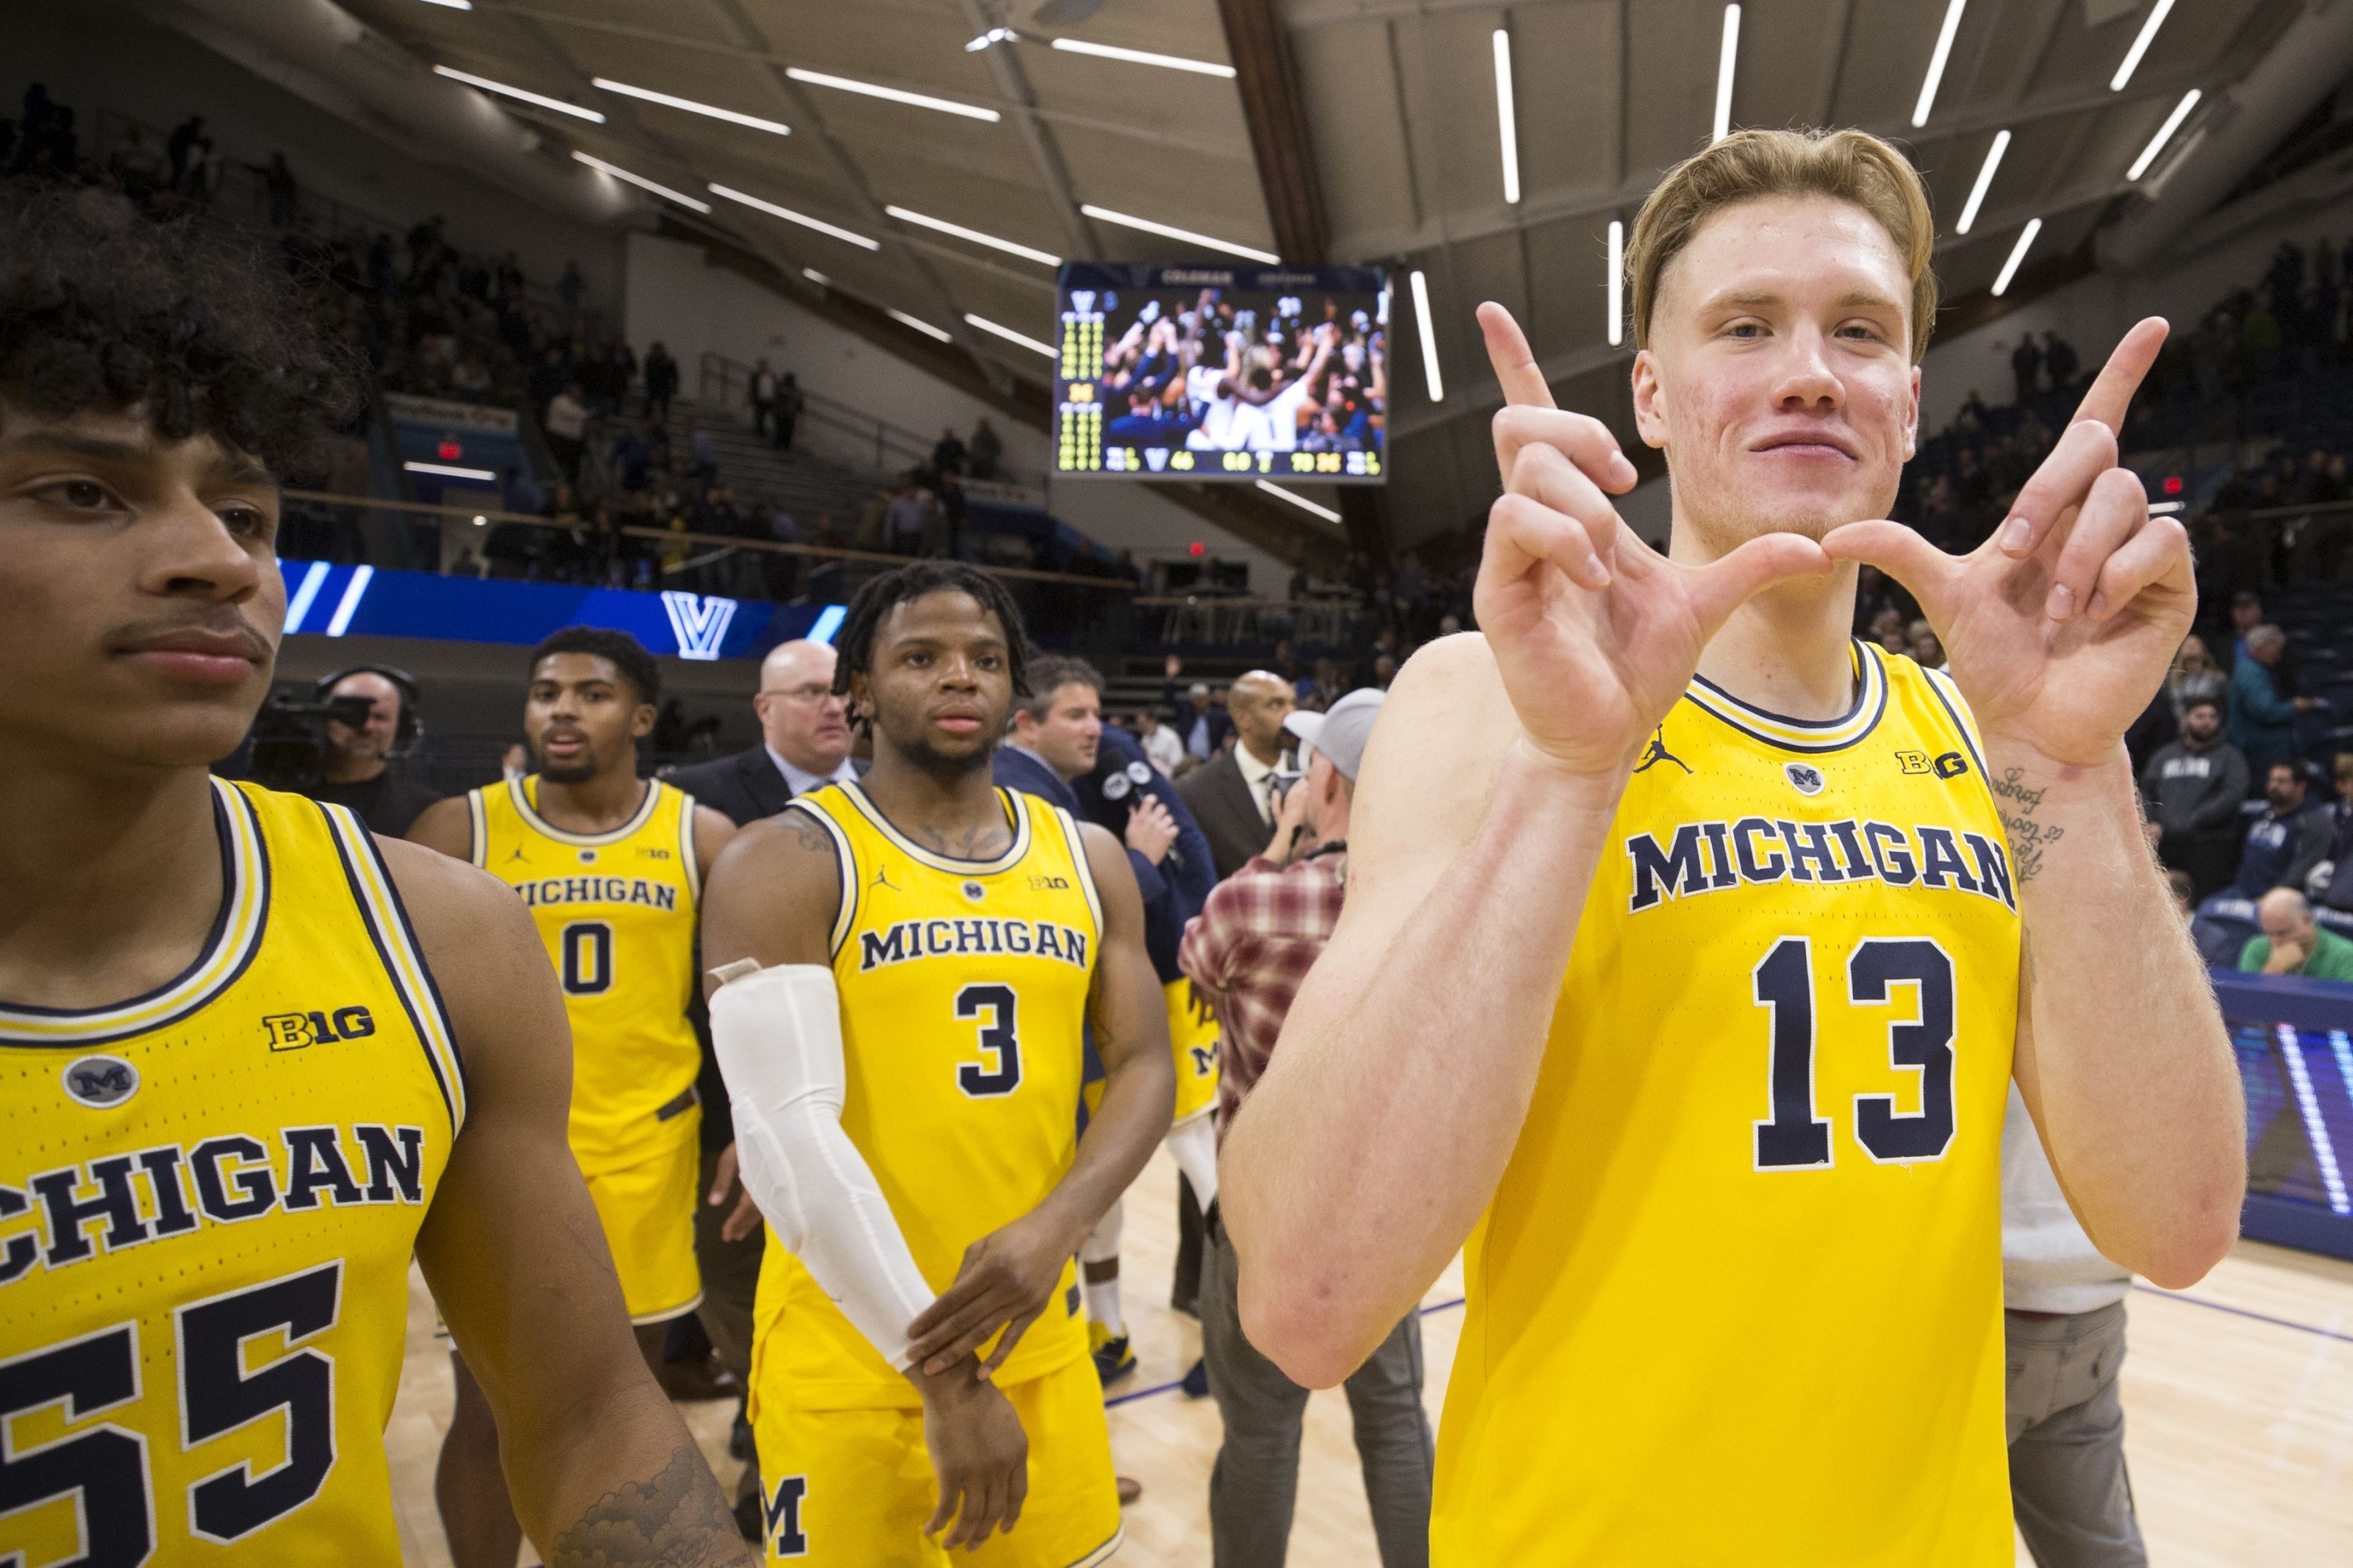 Michigan Basketball could get another quality win at Tip-off tournament